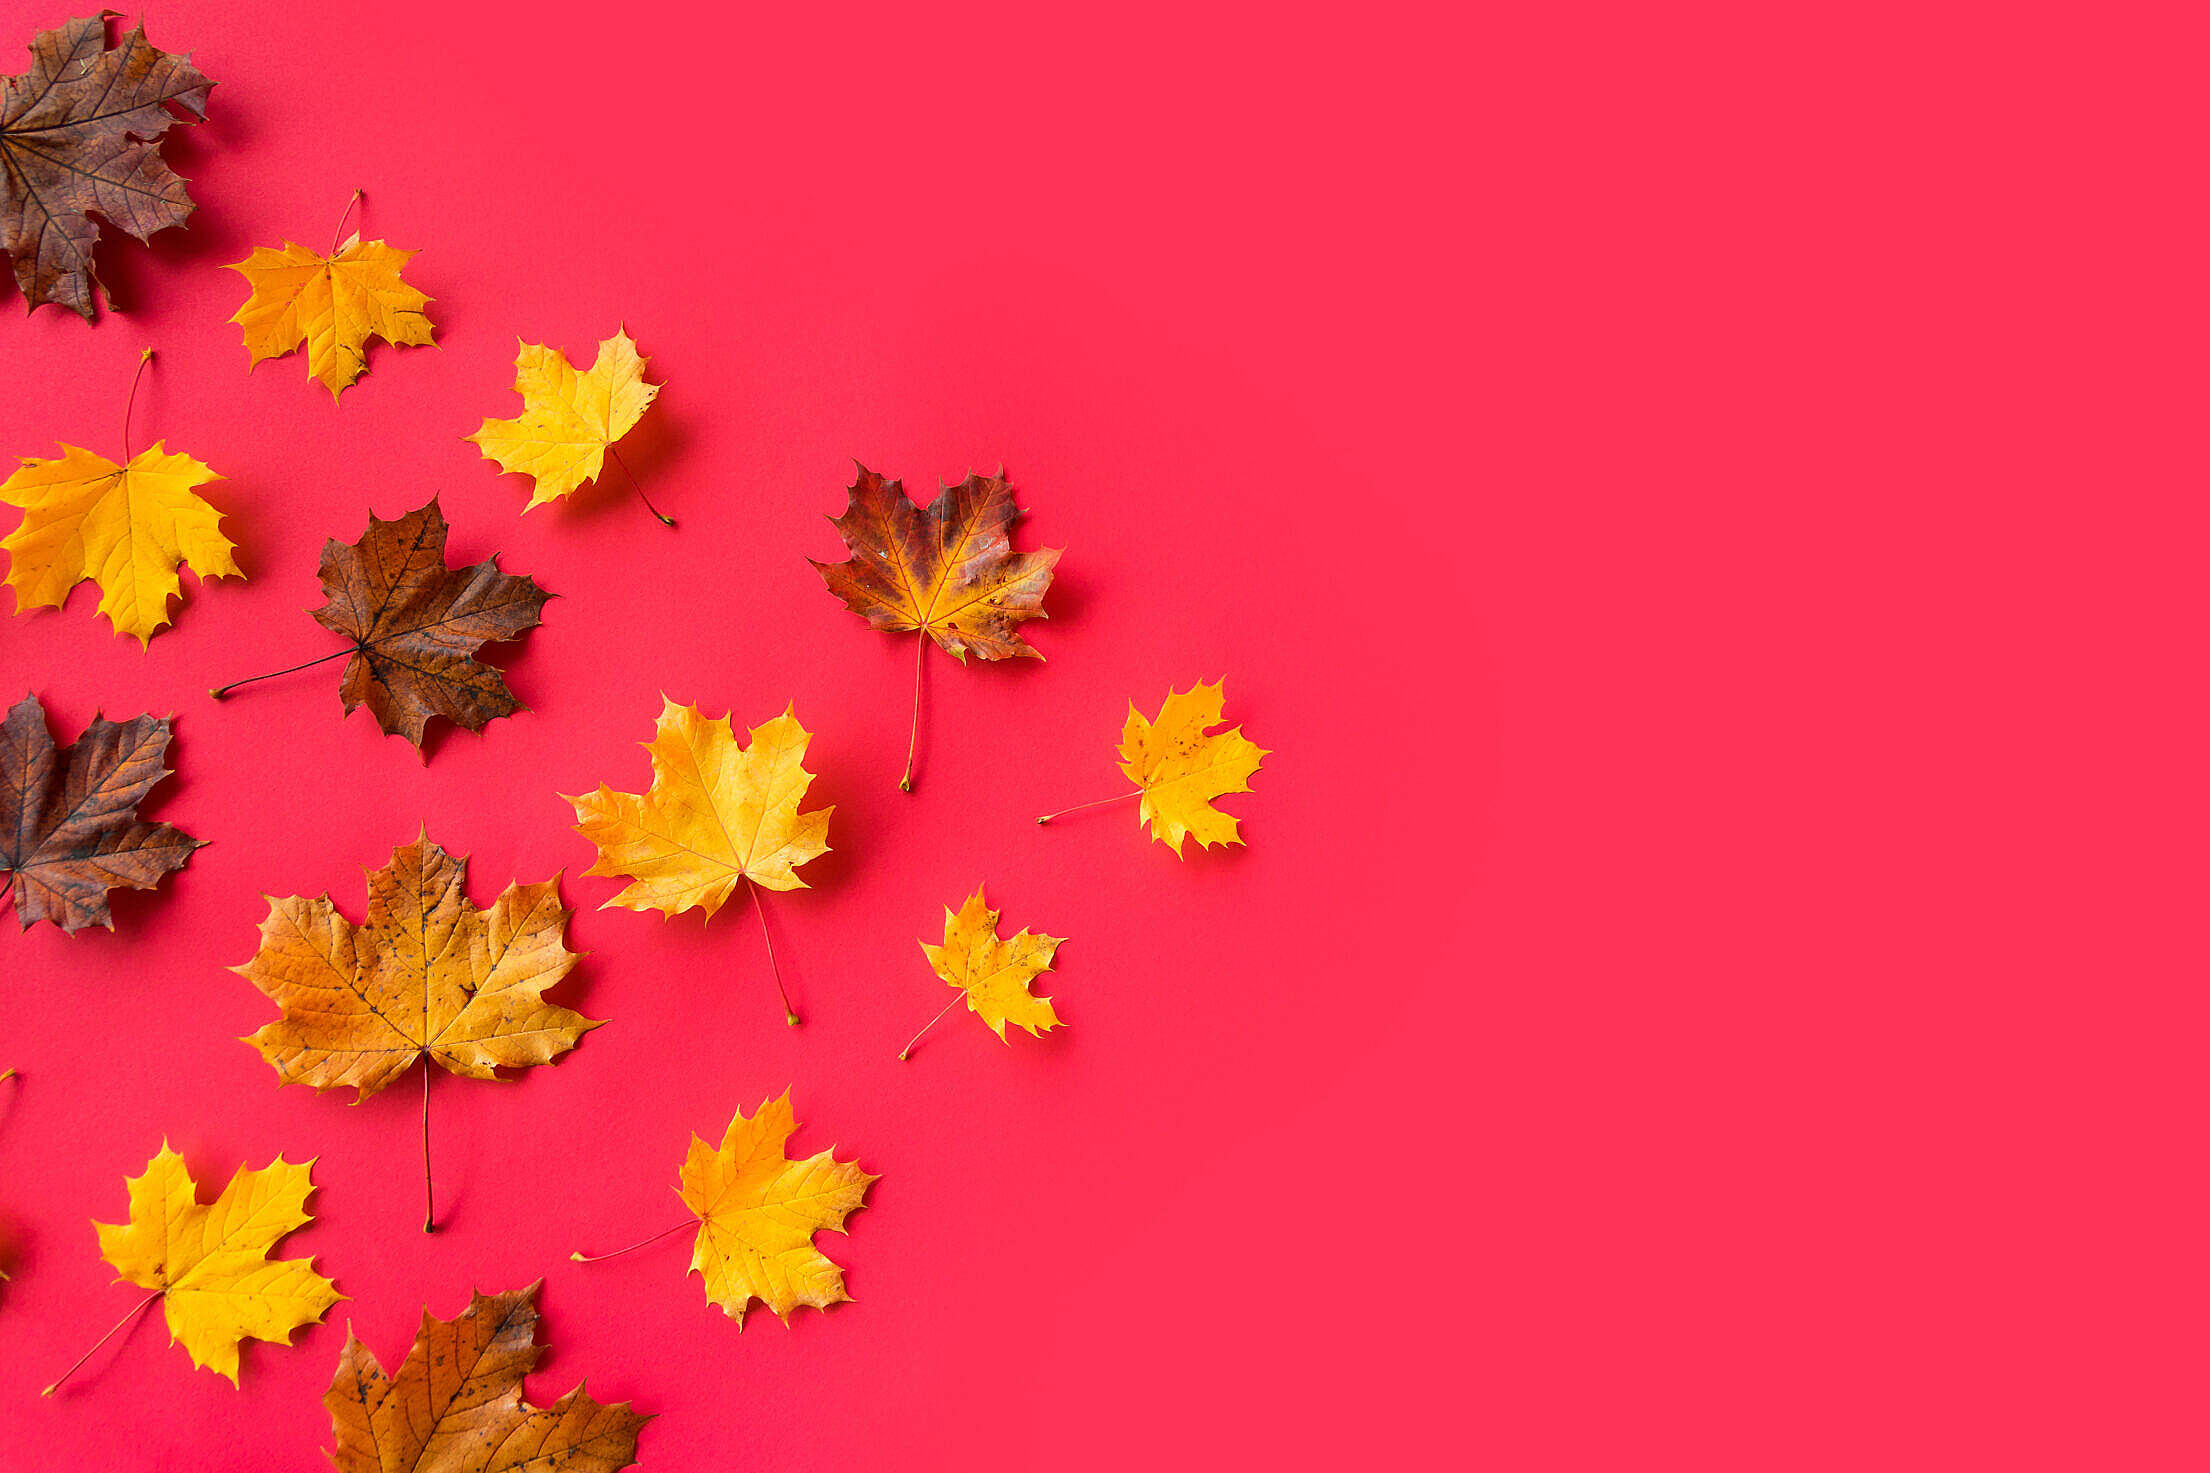 Autumn Leaves on Flat Red Background with Room for Text #3 Free Stock Photo